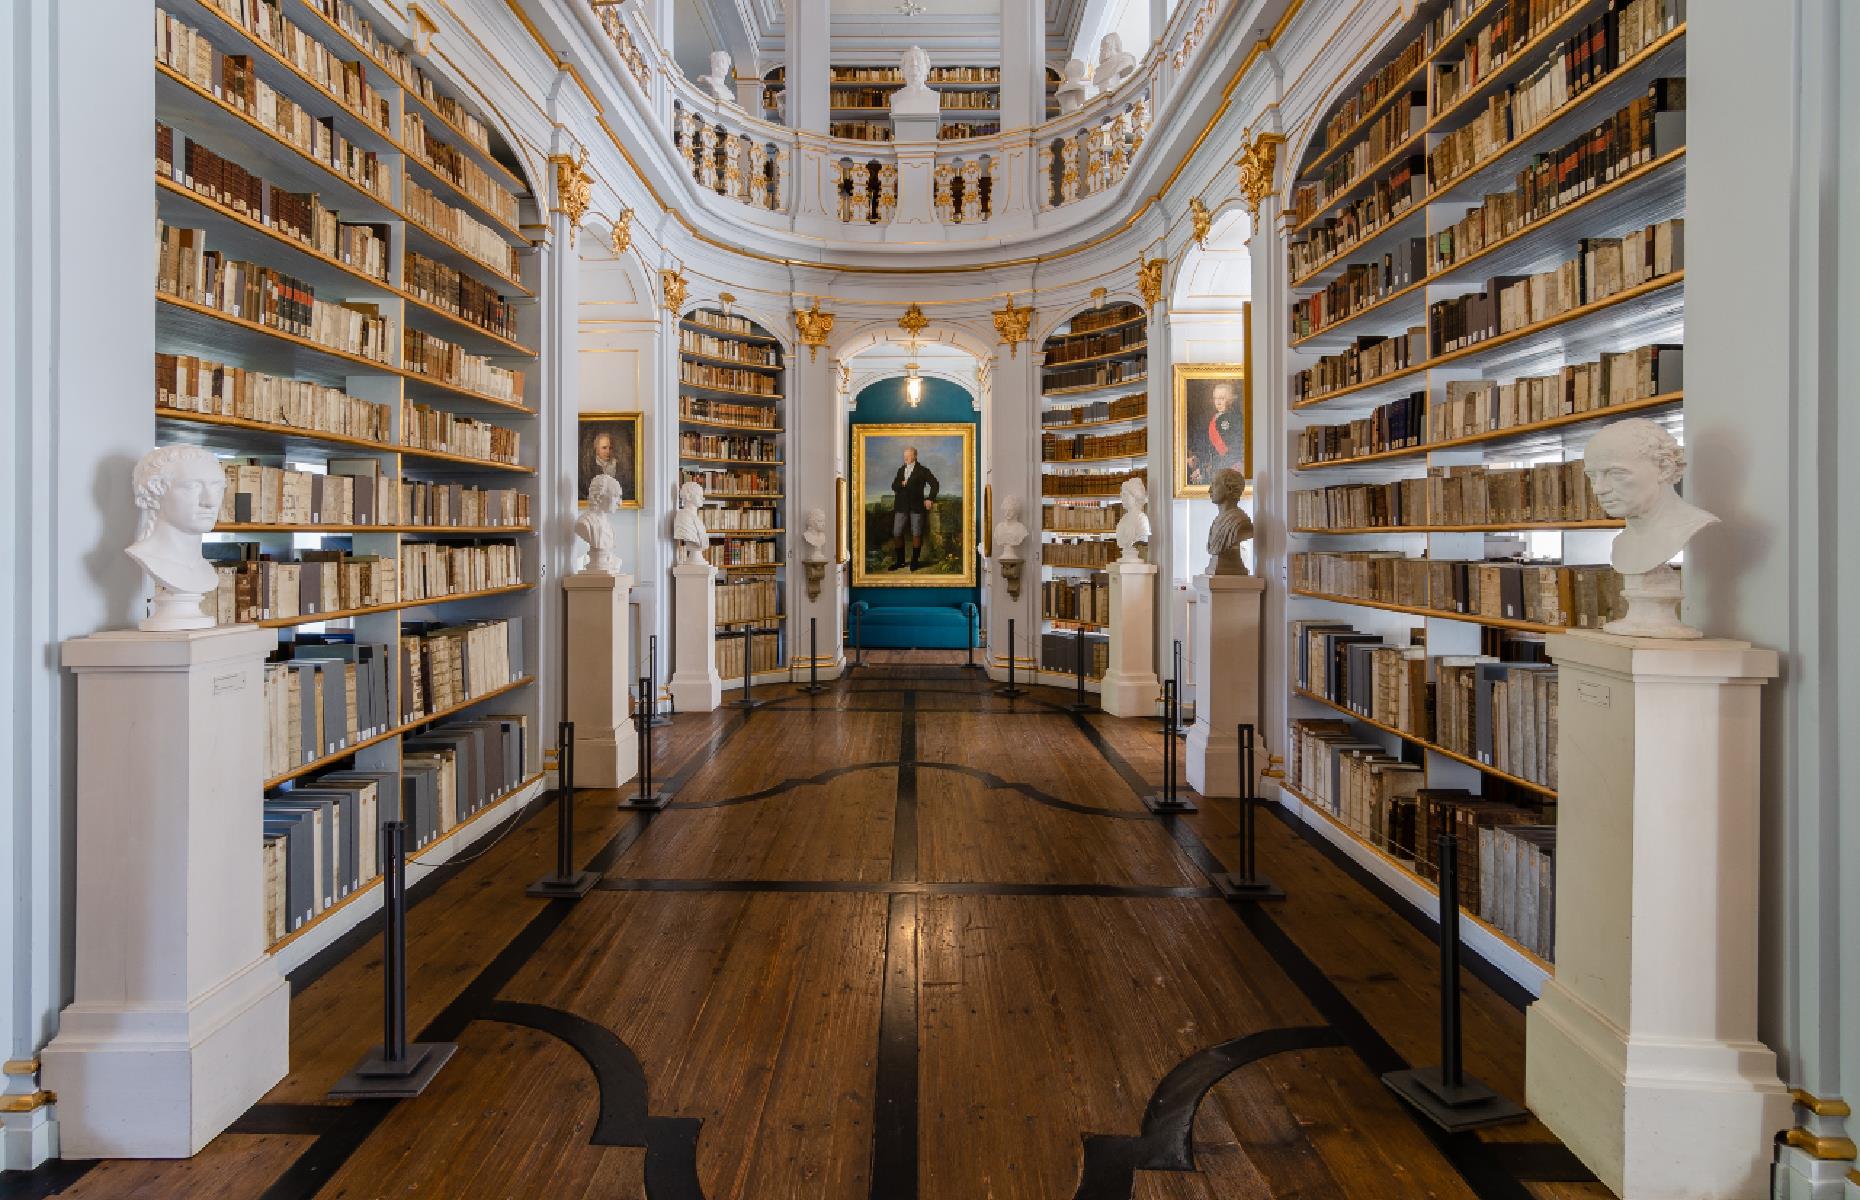 <p><a href="https://www.klassik-stiftung.de/en/herzogin-anna-amalia-bibliothek/the-library/">This library</a> is pretty nice to admire from the outside, with its buttery stone façade. But it’s the interior that truly stuns and particularly the Rococo Hall (pictured) opened in 1766. Duchess Anna Amalia is credited with ushering in Weimar’s cultural and artistic renaissance, appointing poet Christoph Martin Wieland as her sons’ tutor. Other literary luminaries followed and many played a role in curating the library’s collections. The building was damaged in a fire in 2004 and reopened three years later after extensive renovations.</p>